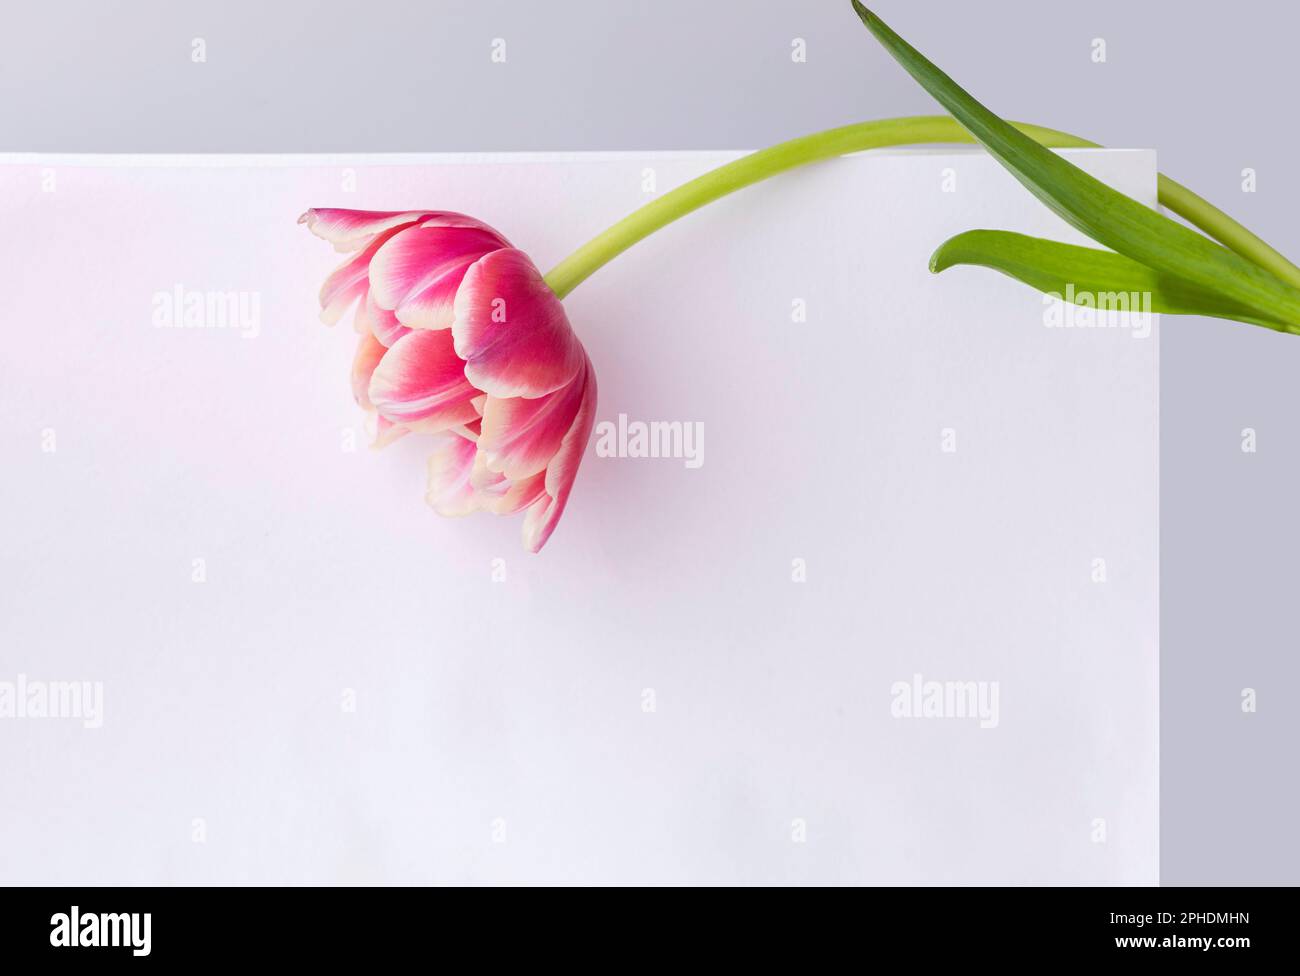 spring flower banner, pink tulip flower onbackground on a white, gray background Stock Photo